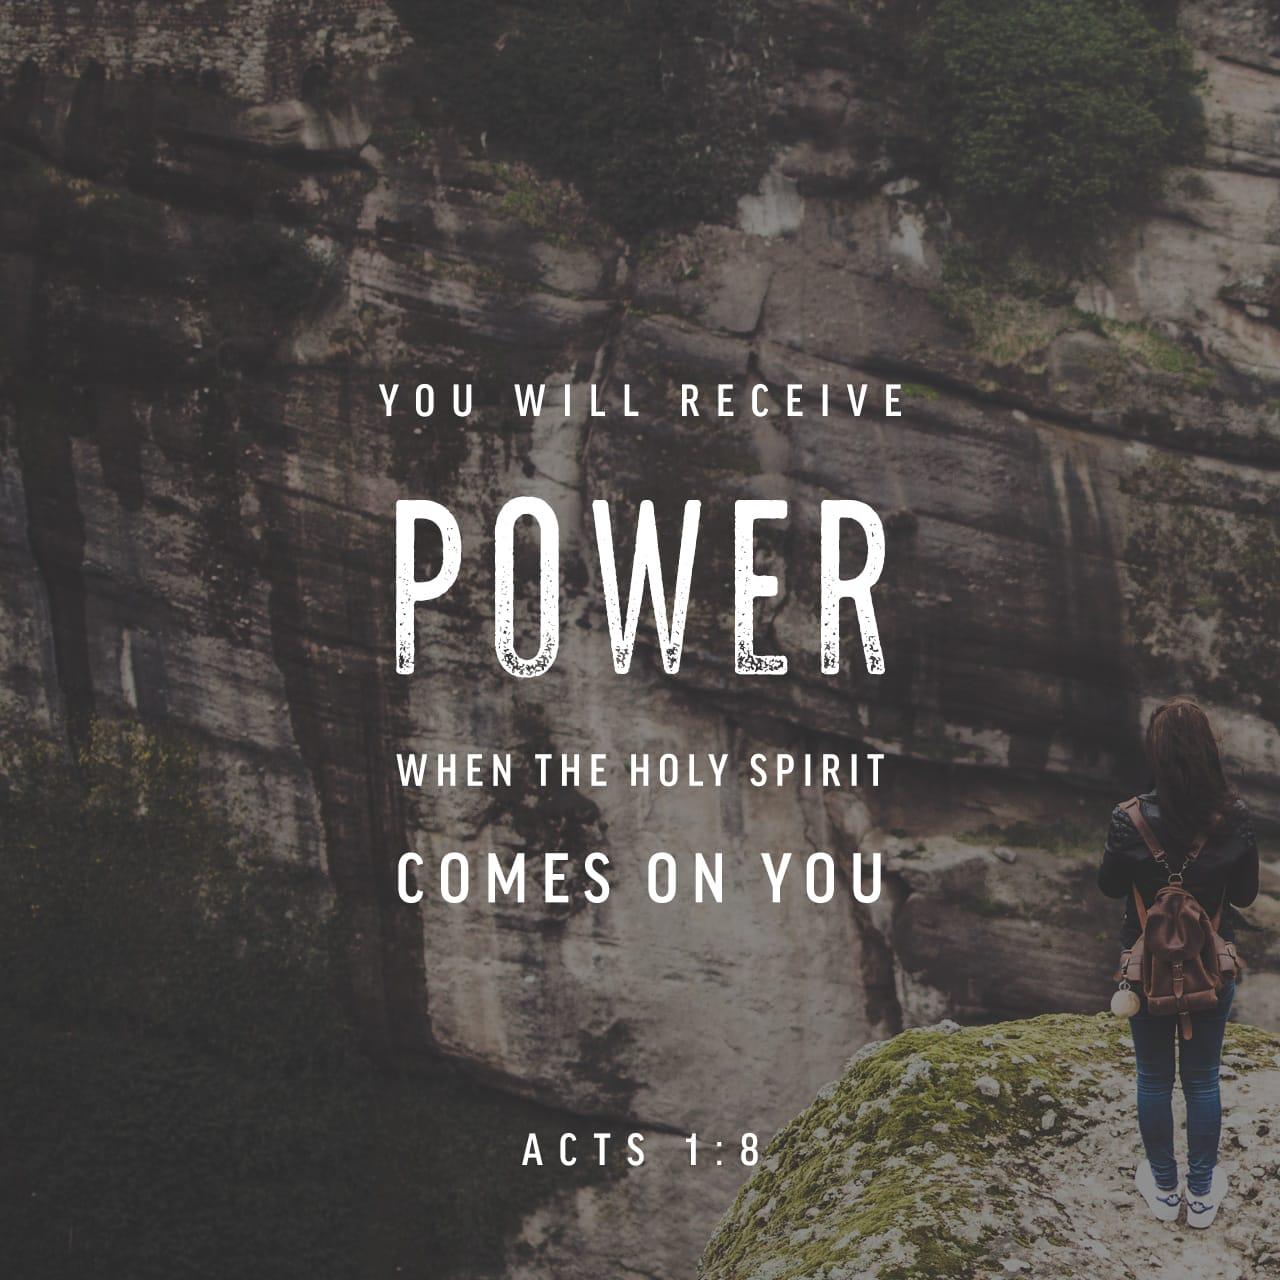 Bible Verse of the Day - day 89 - image 2277 (Acts 1:1-11)